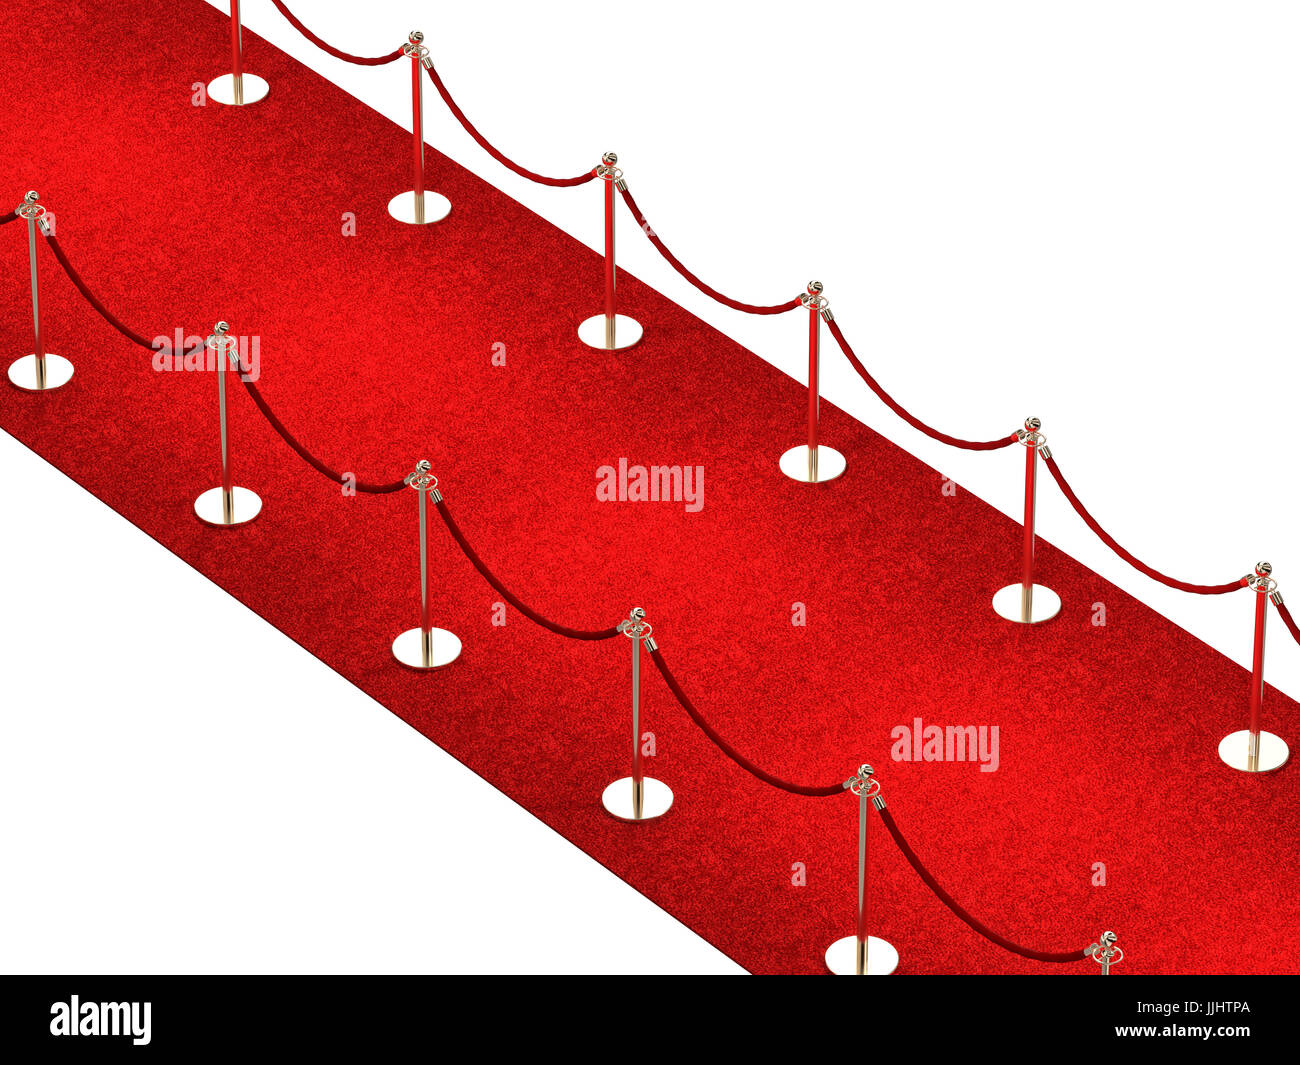 red carpet on white background 3d rendering image Stock Photo